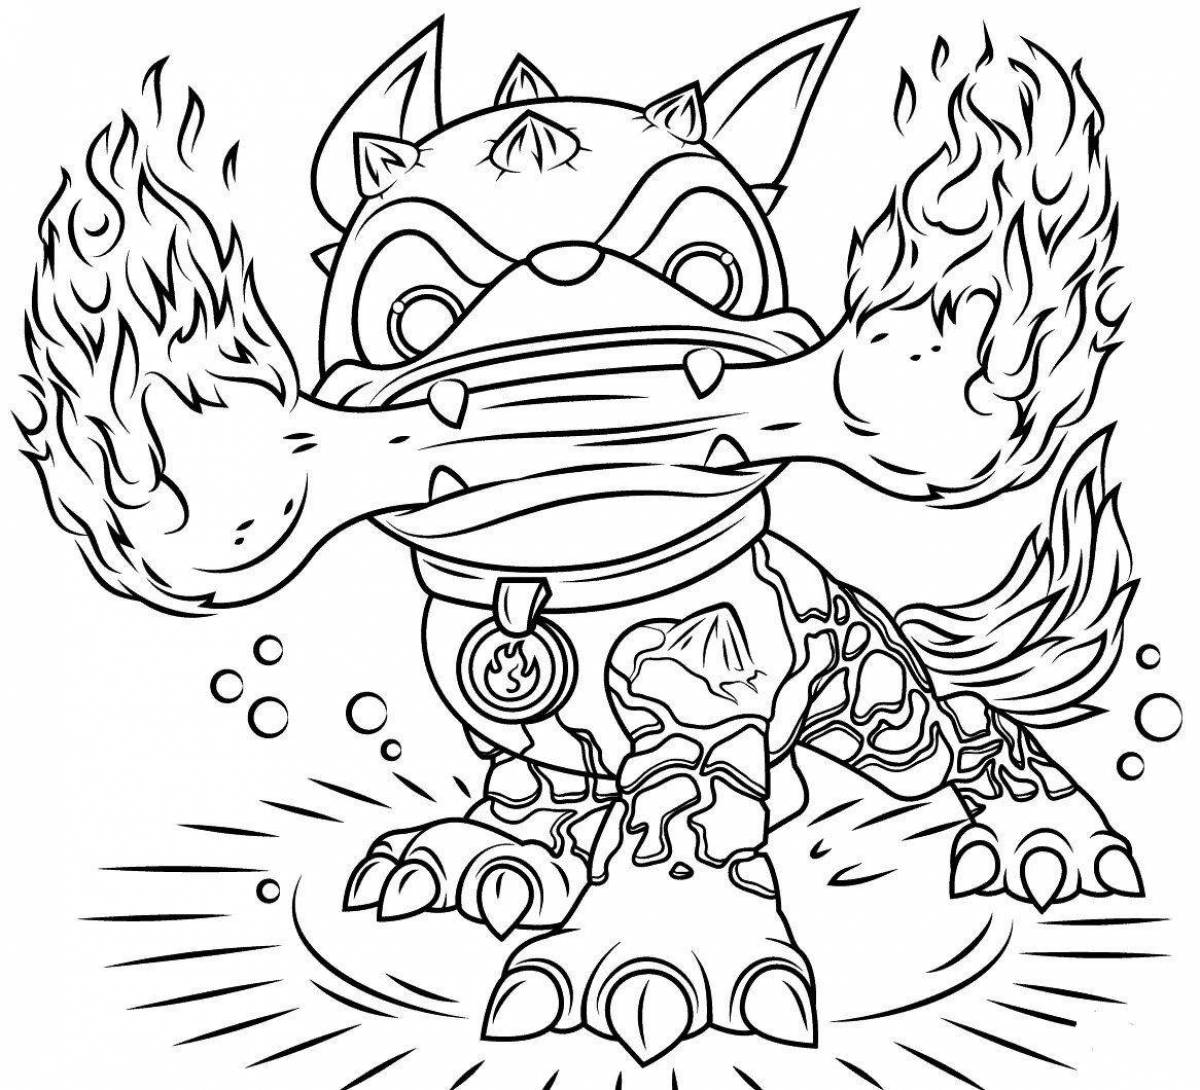 Sizzling fire monster coloring page